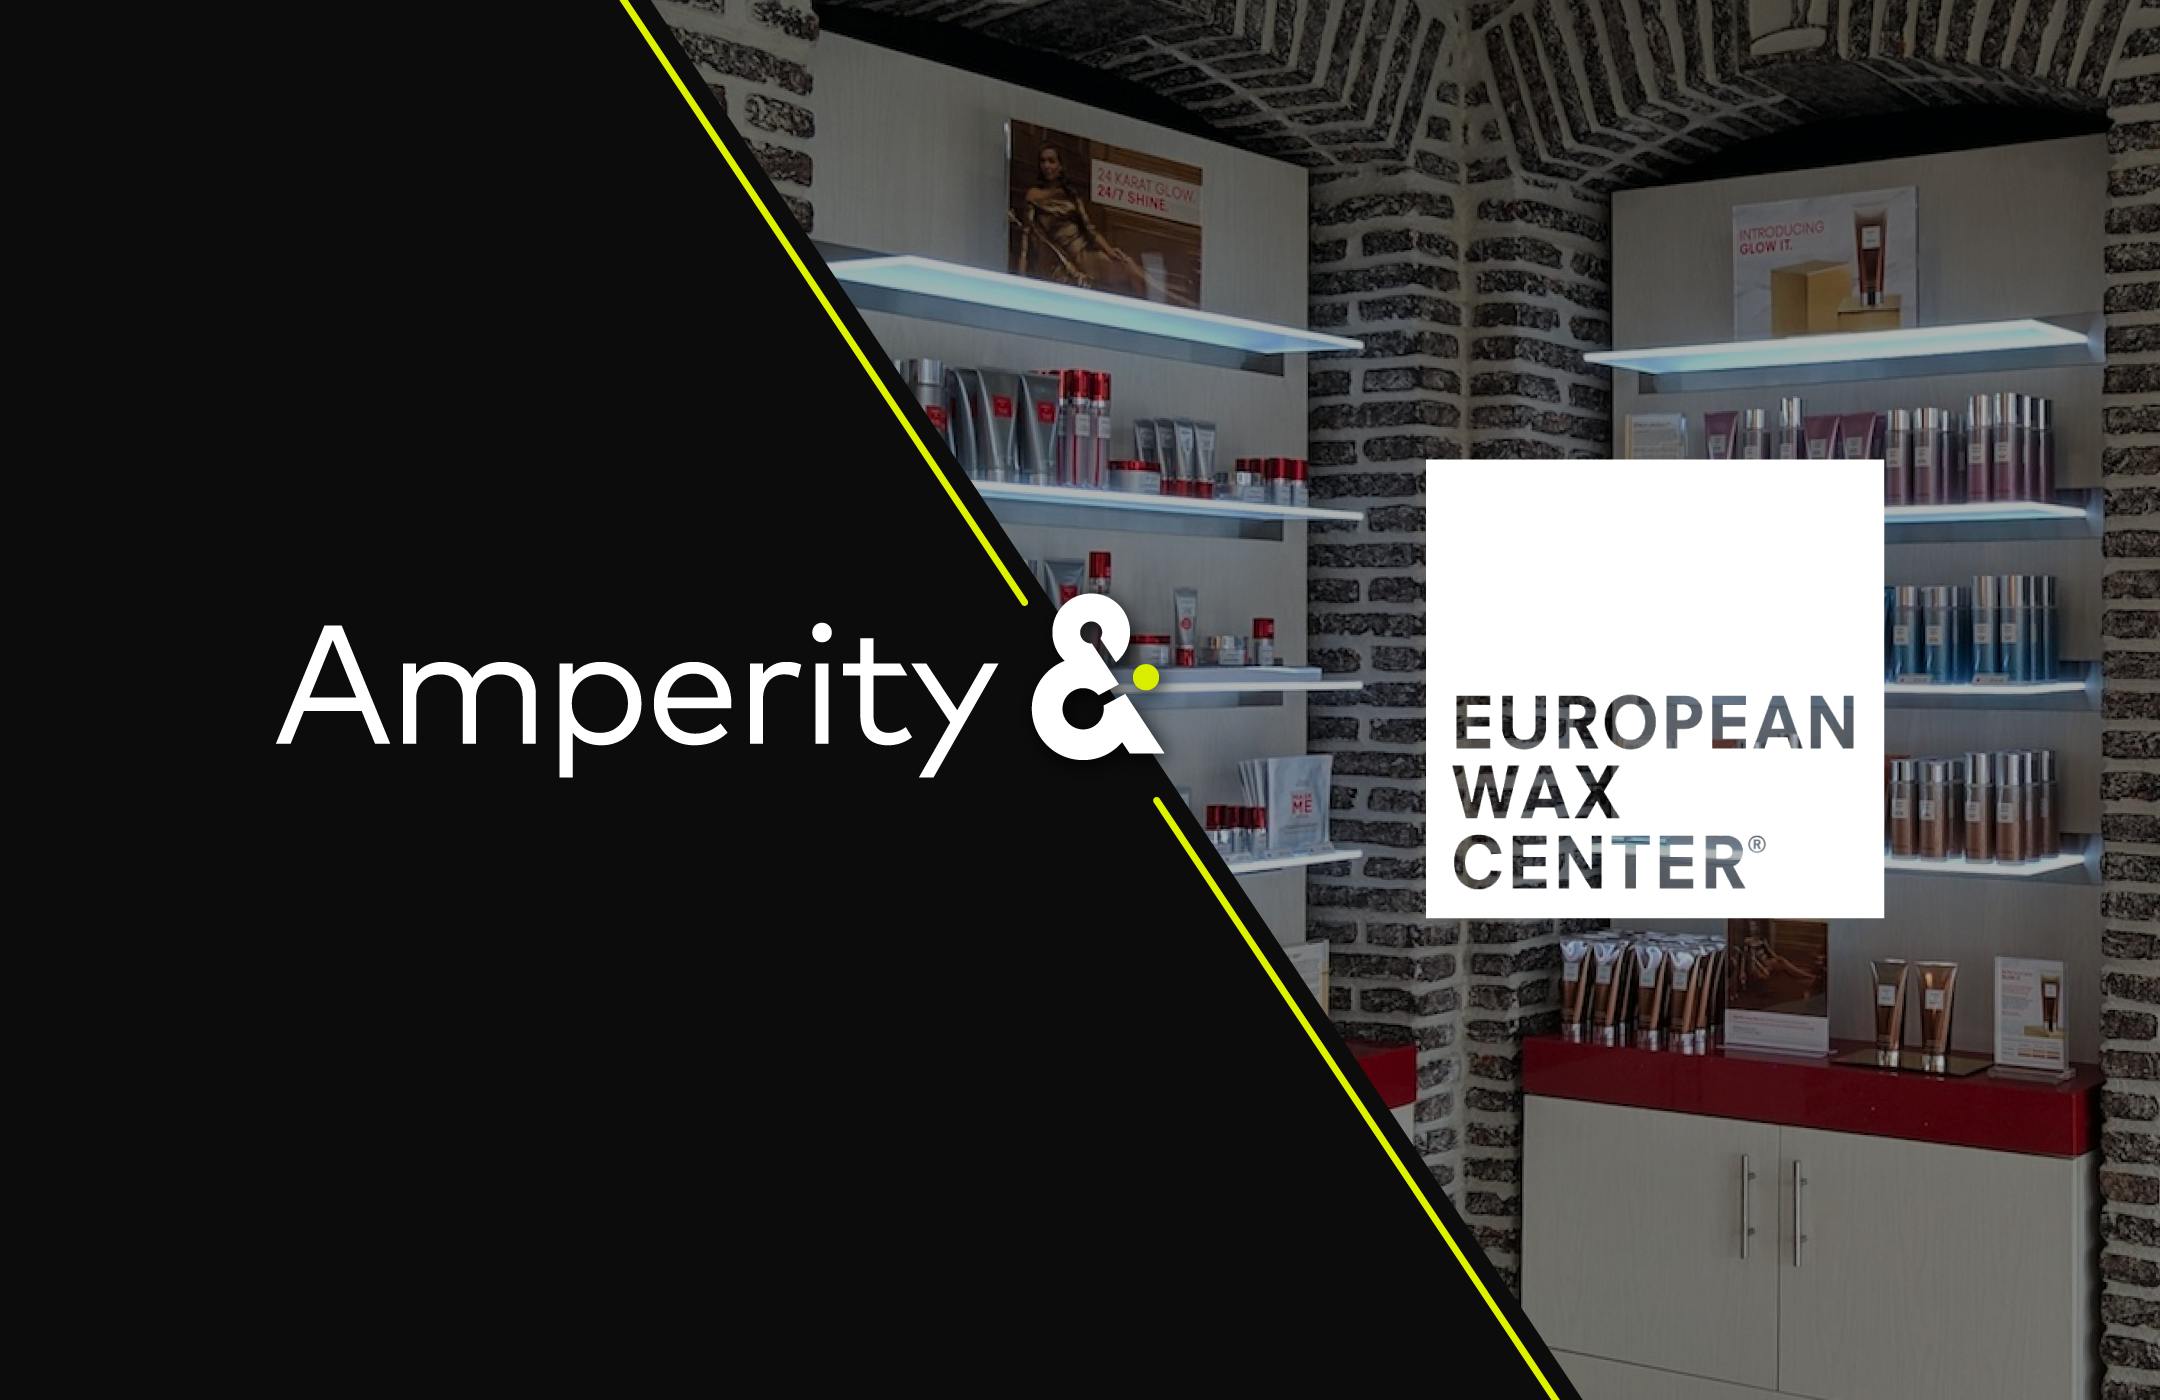 Amperity logo and European Wax Center logo with image of spa behind logo